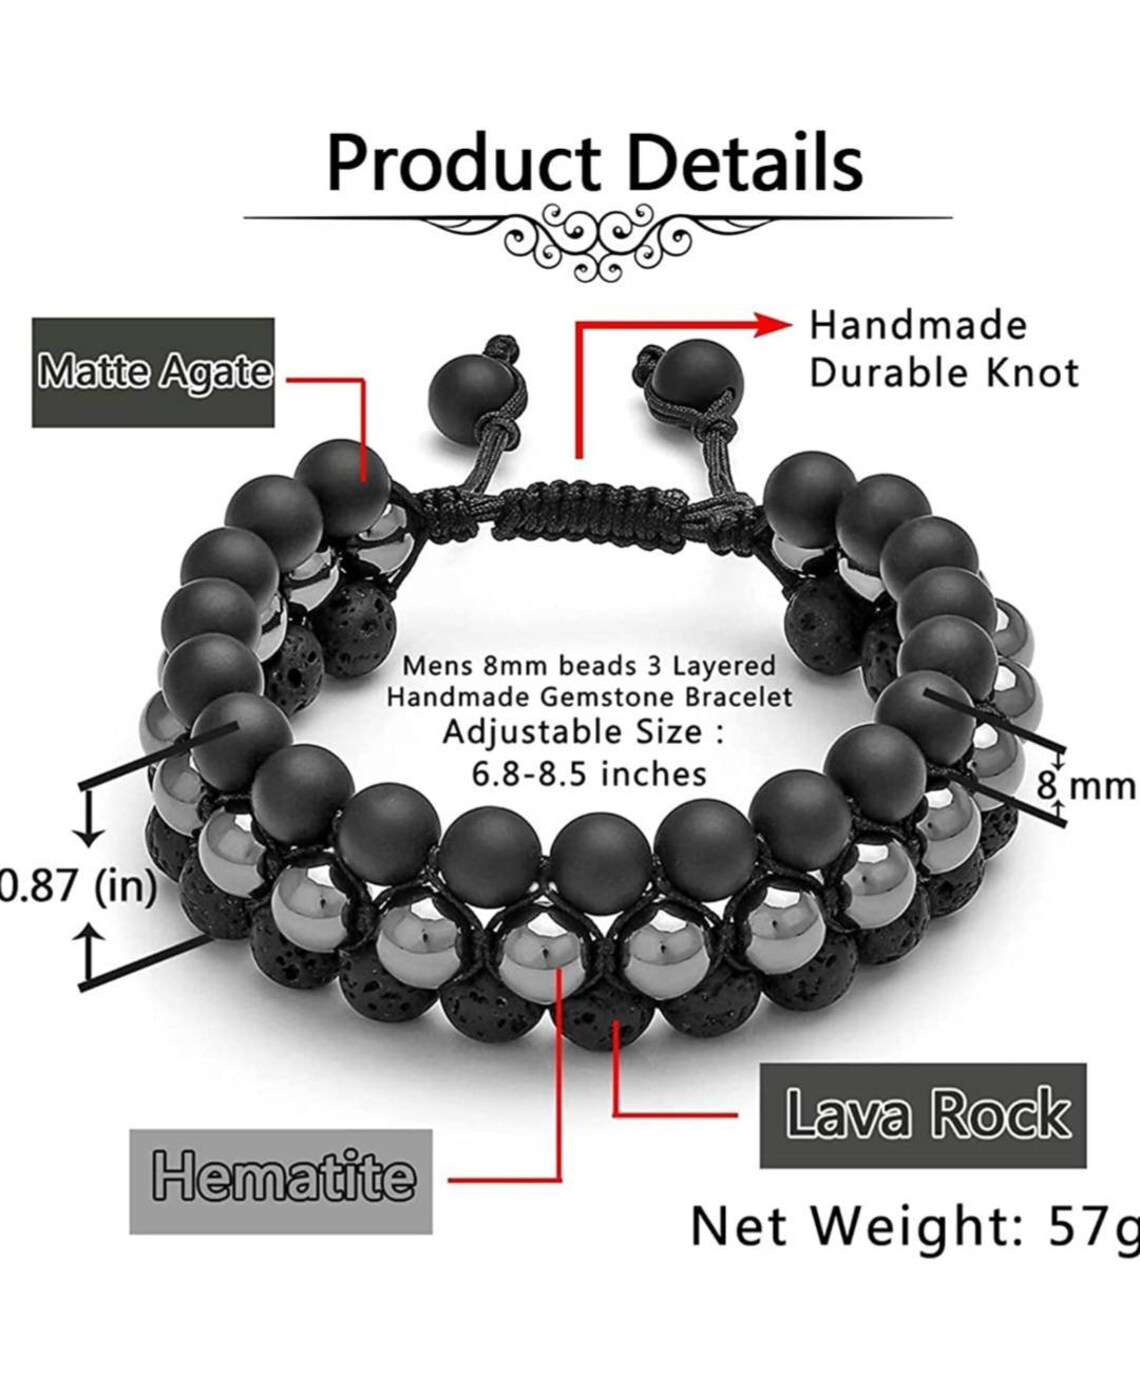 Natural Certified hematite stone Bracelet For healing Price - 300/- rs